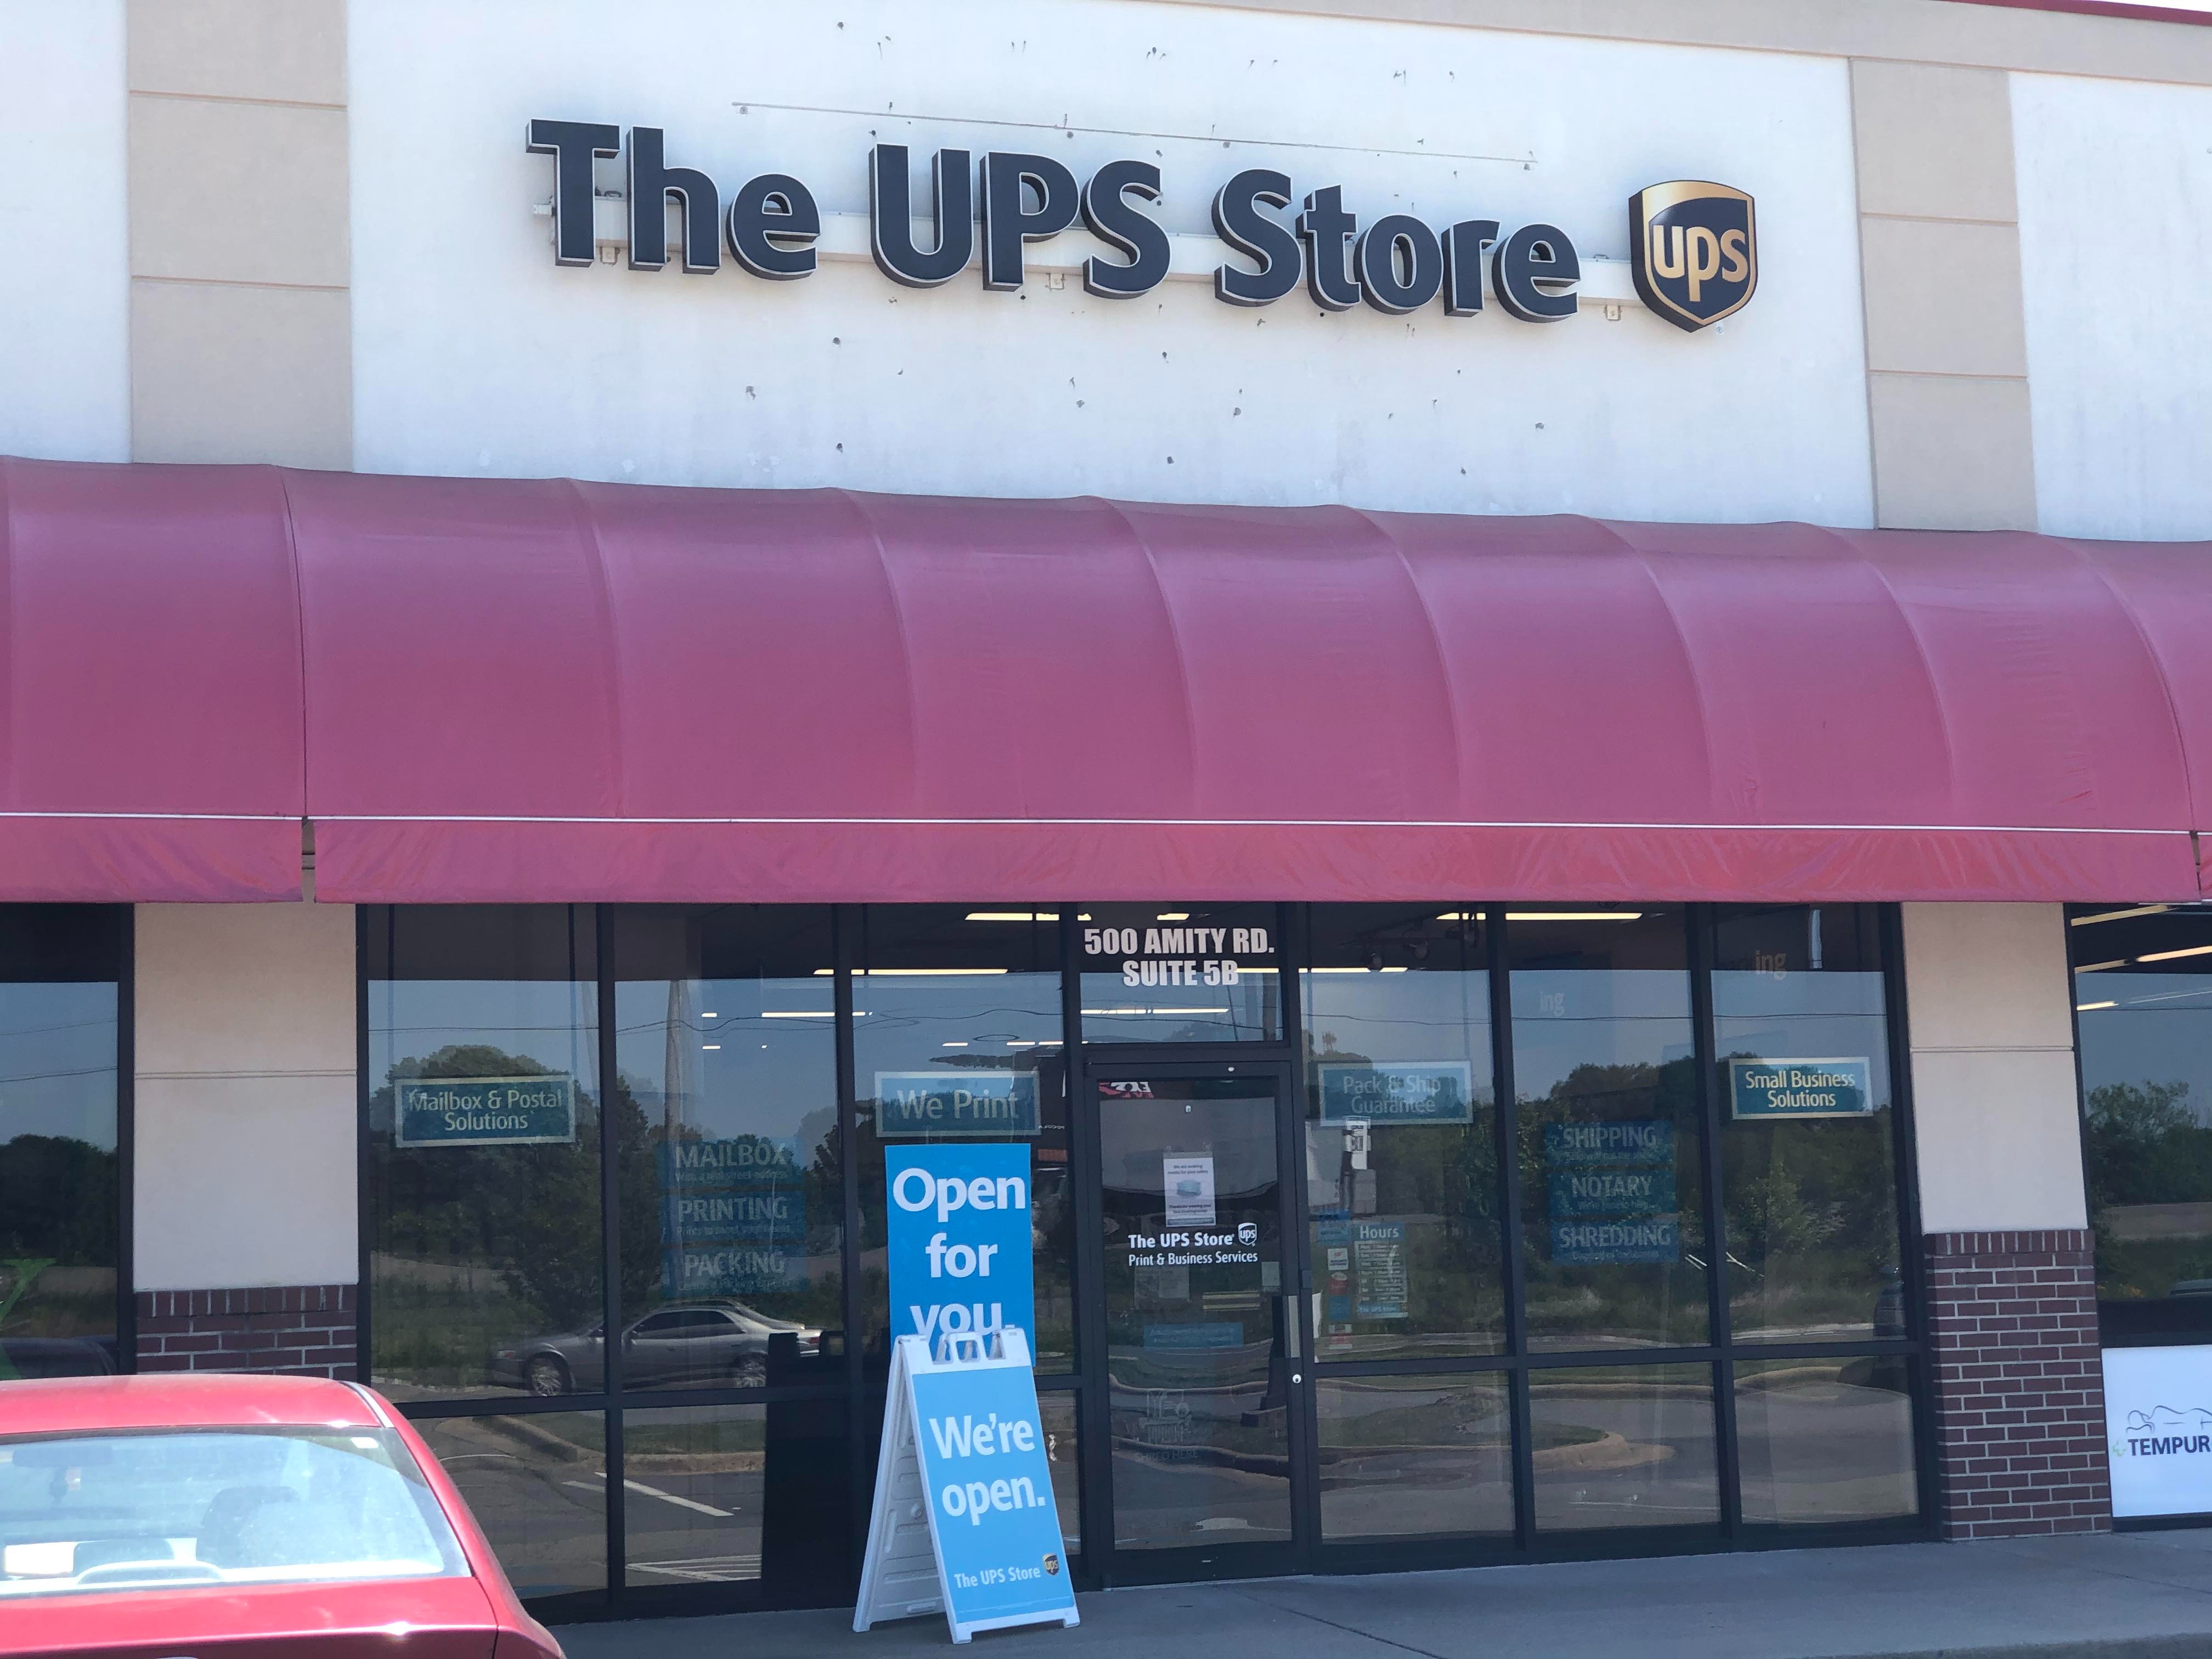 Facade of The UPS Store on Amity